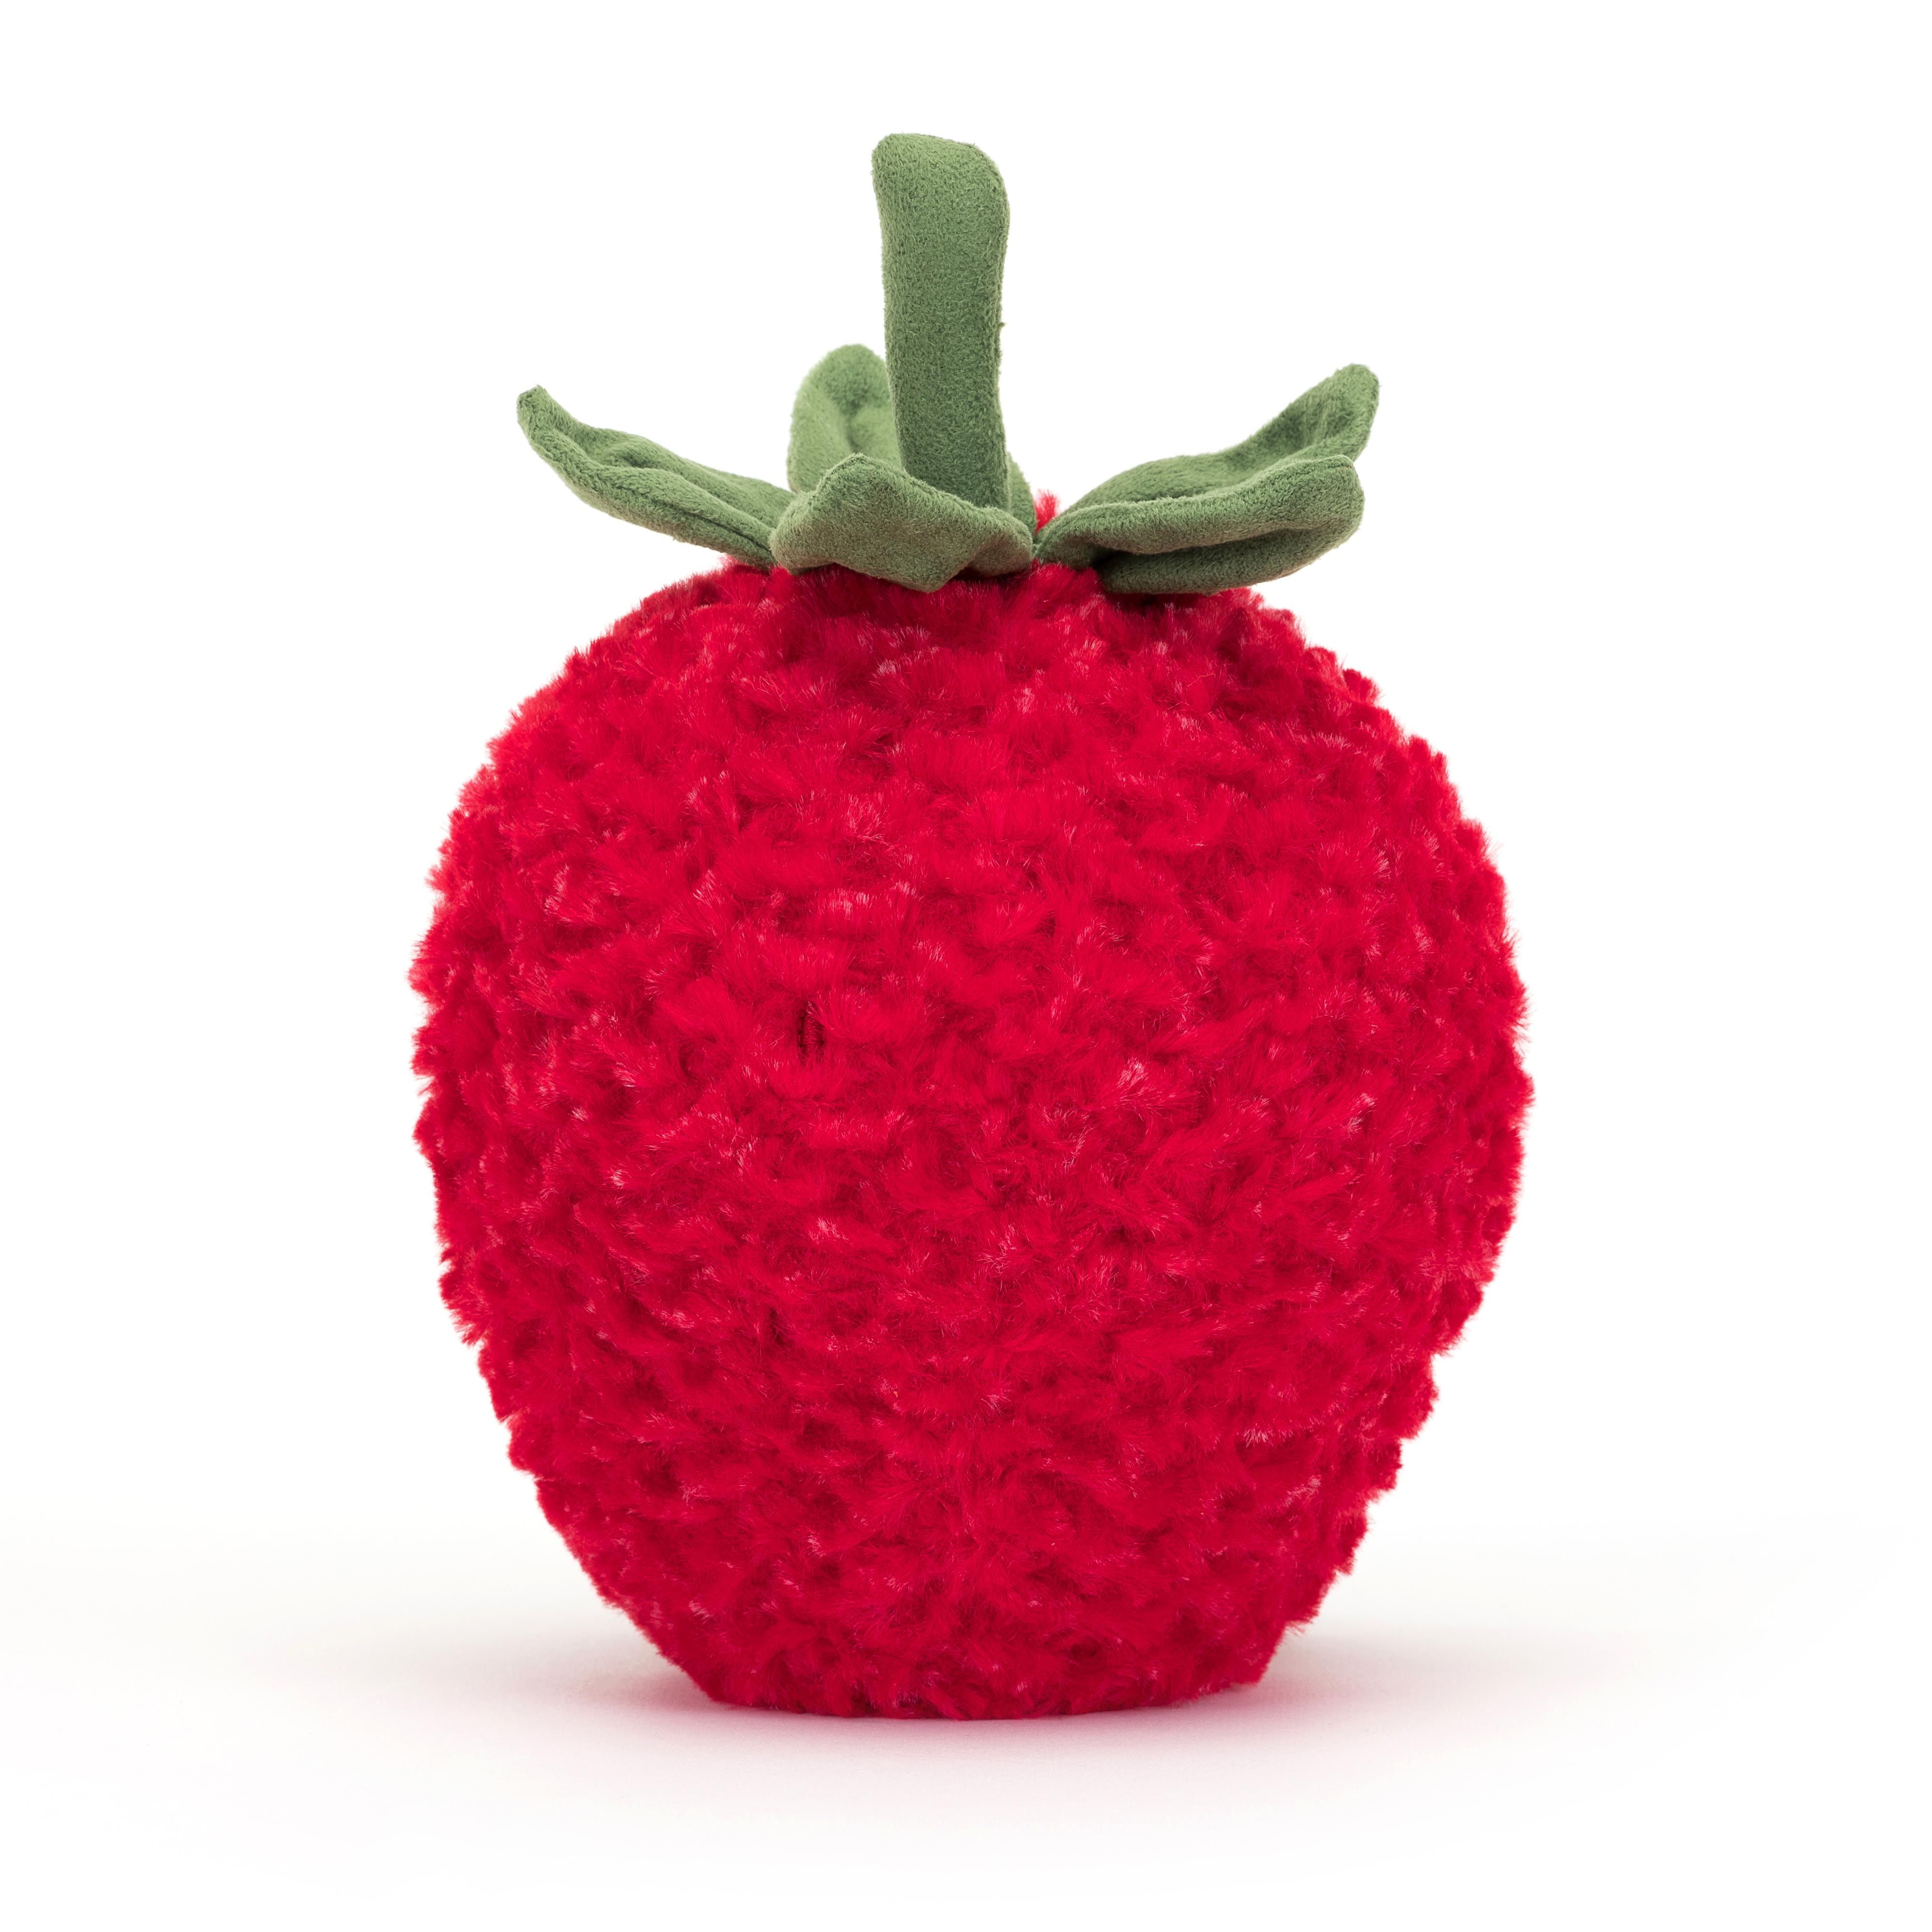 Jellycat Amuseable Strawberry Red soft toy with green leaves and stem